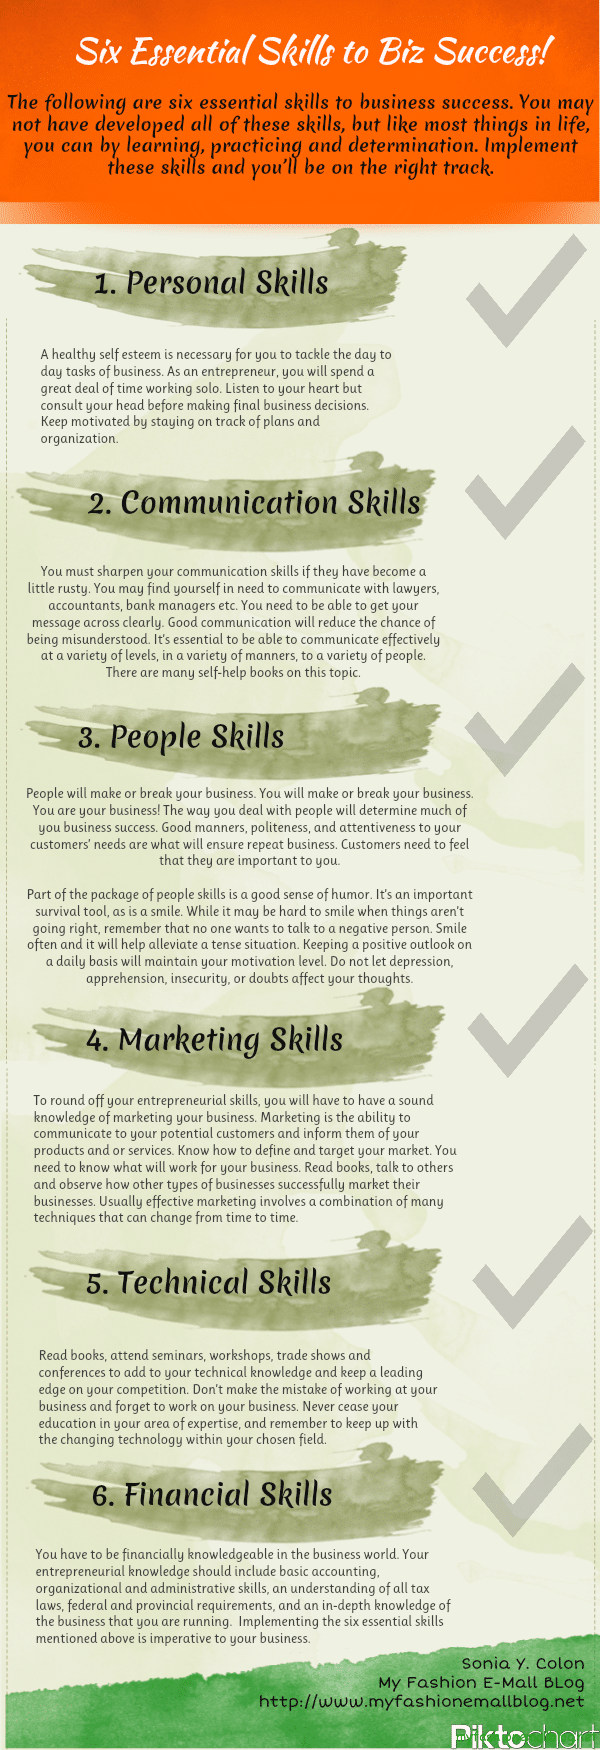 6 Essential Skills For Business Success [infographic]